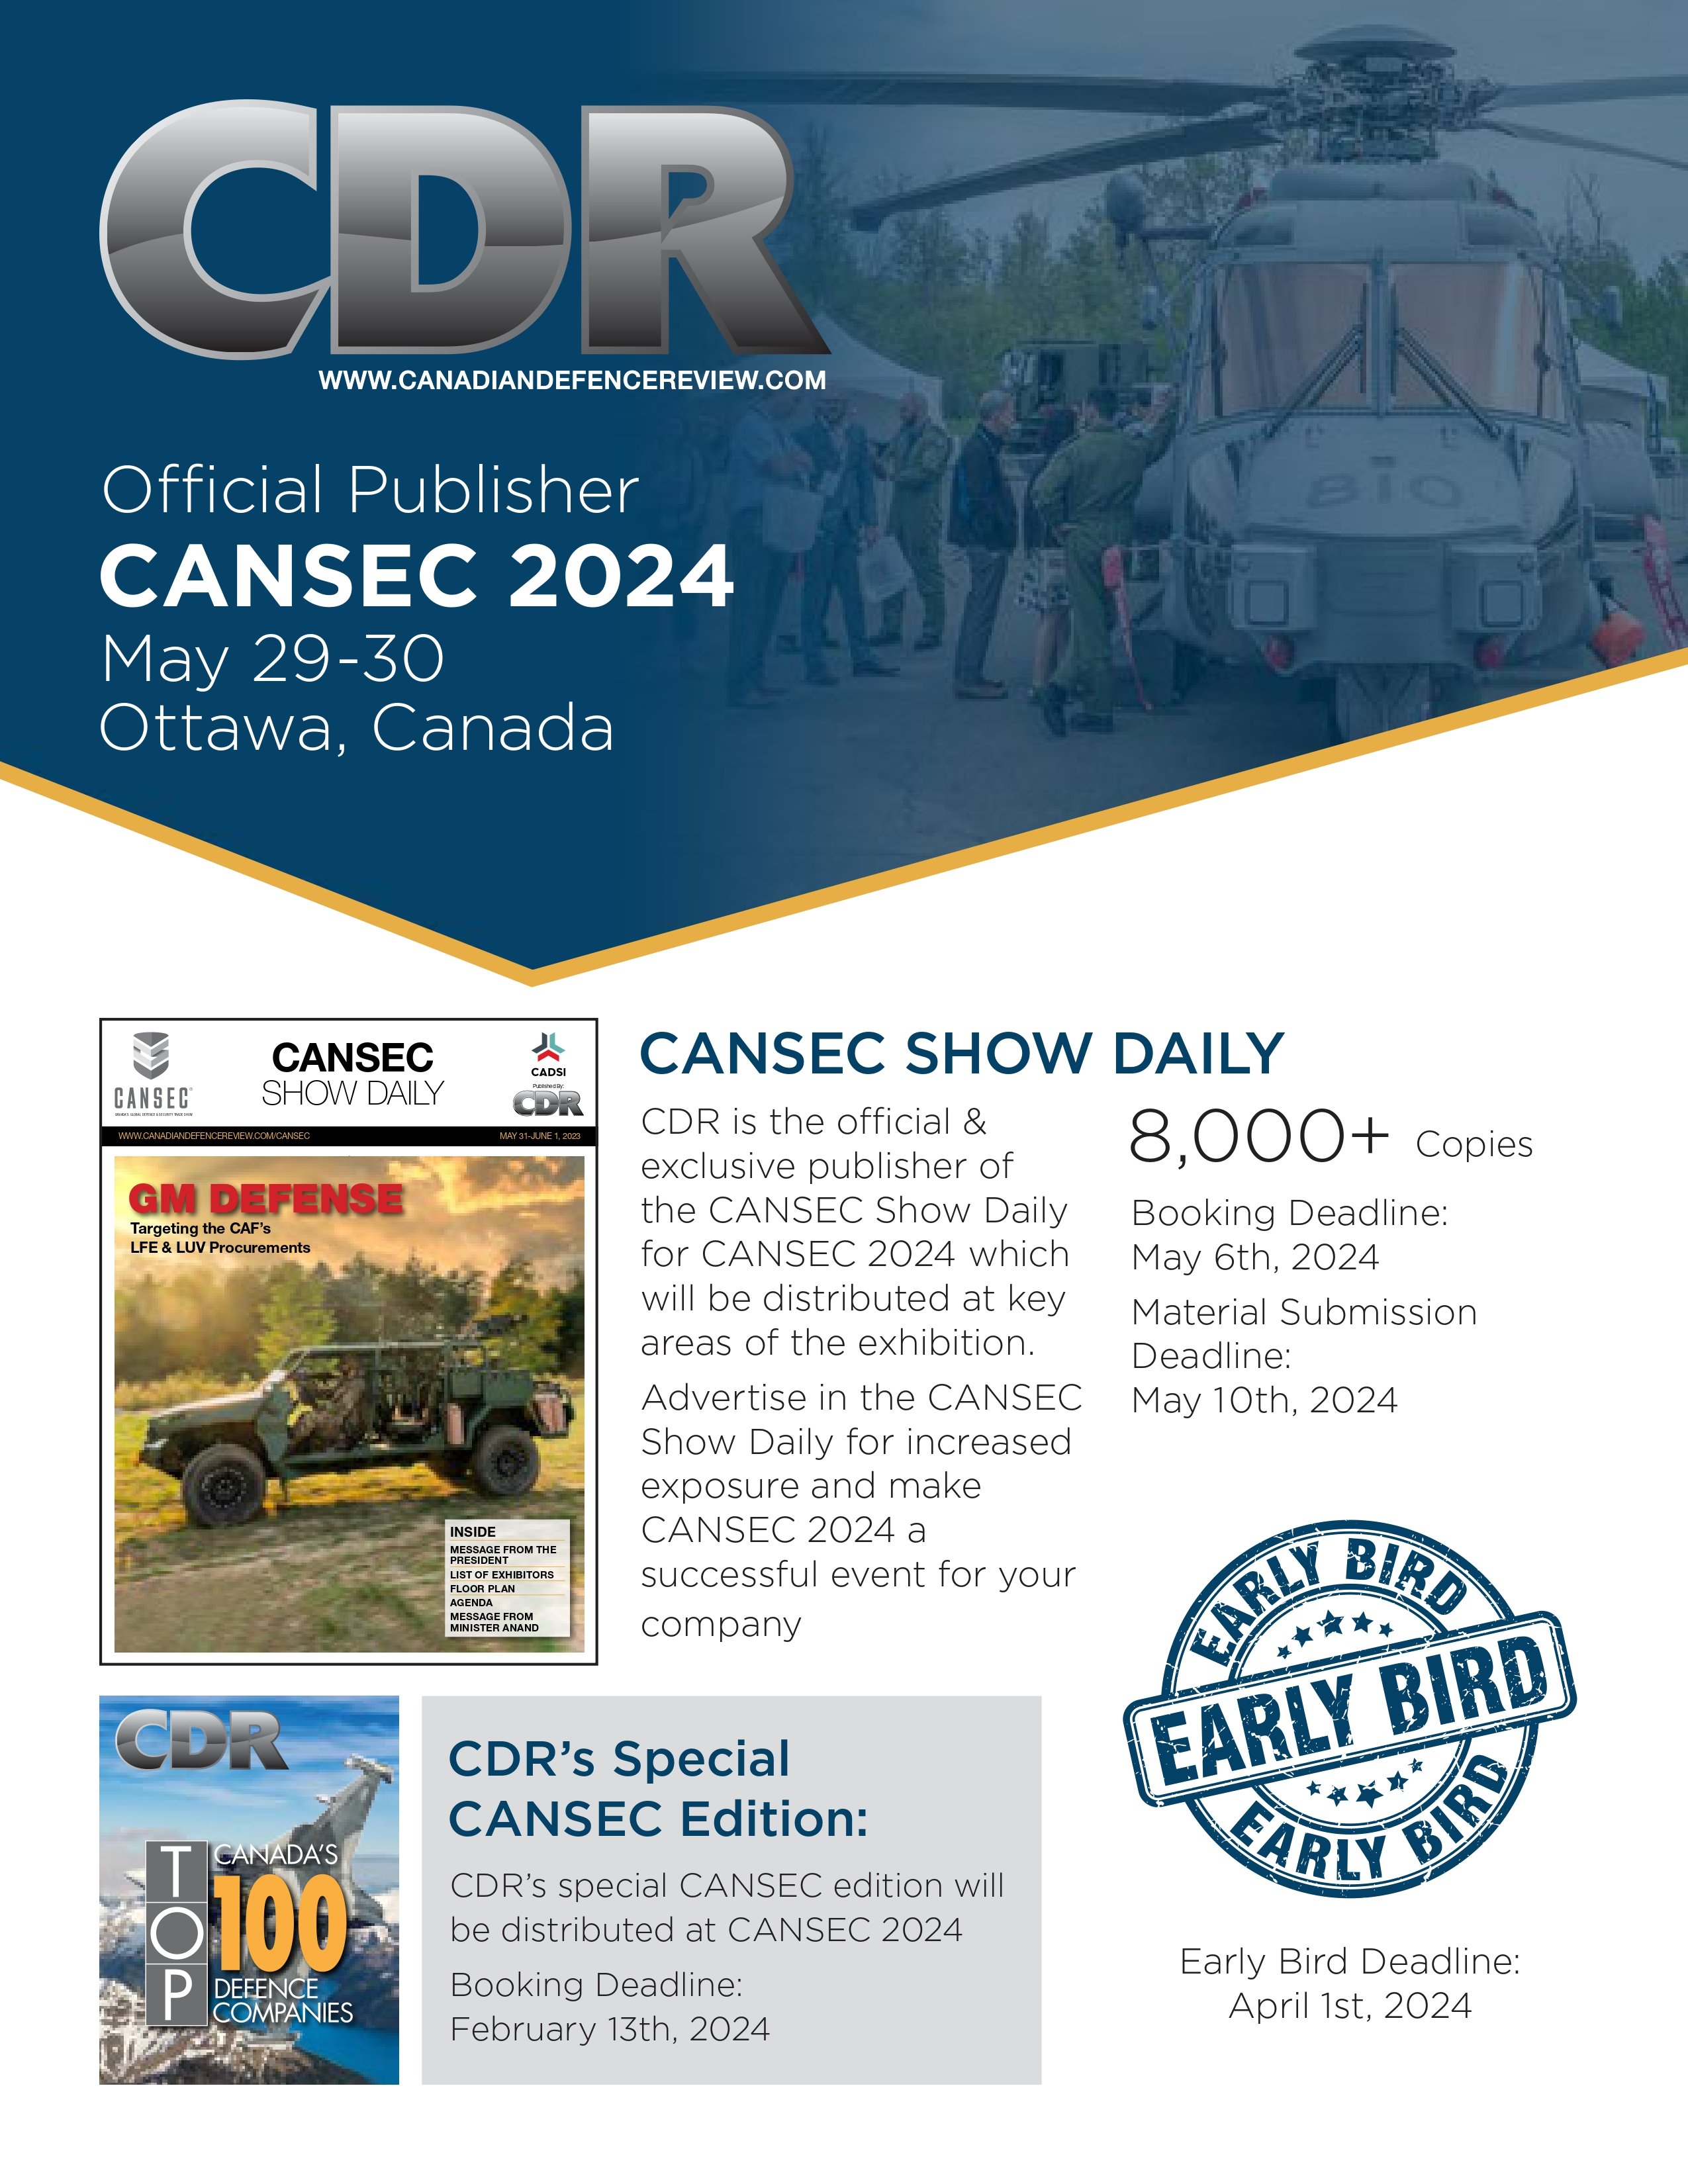 CANSEC 2024 Canadian Defence Review